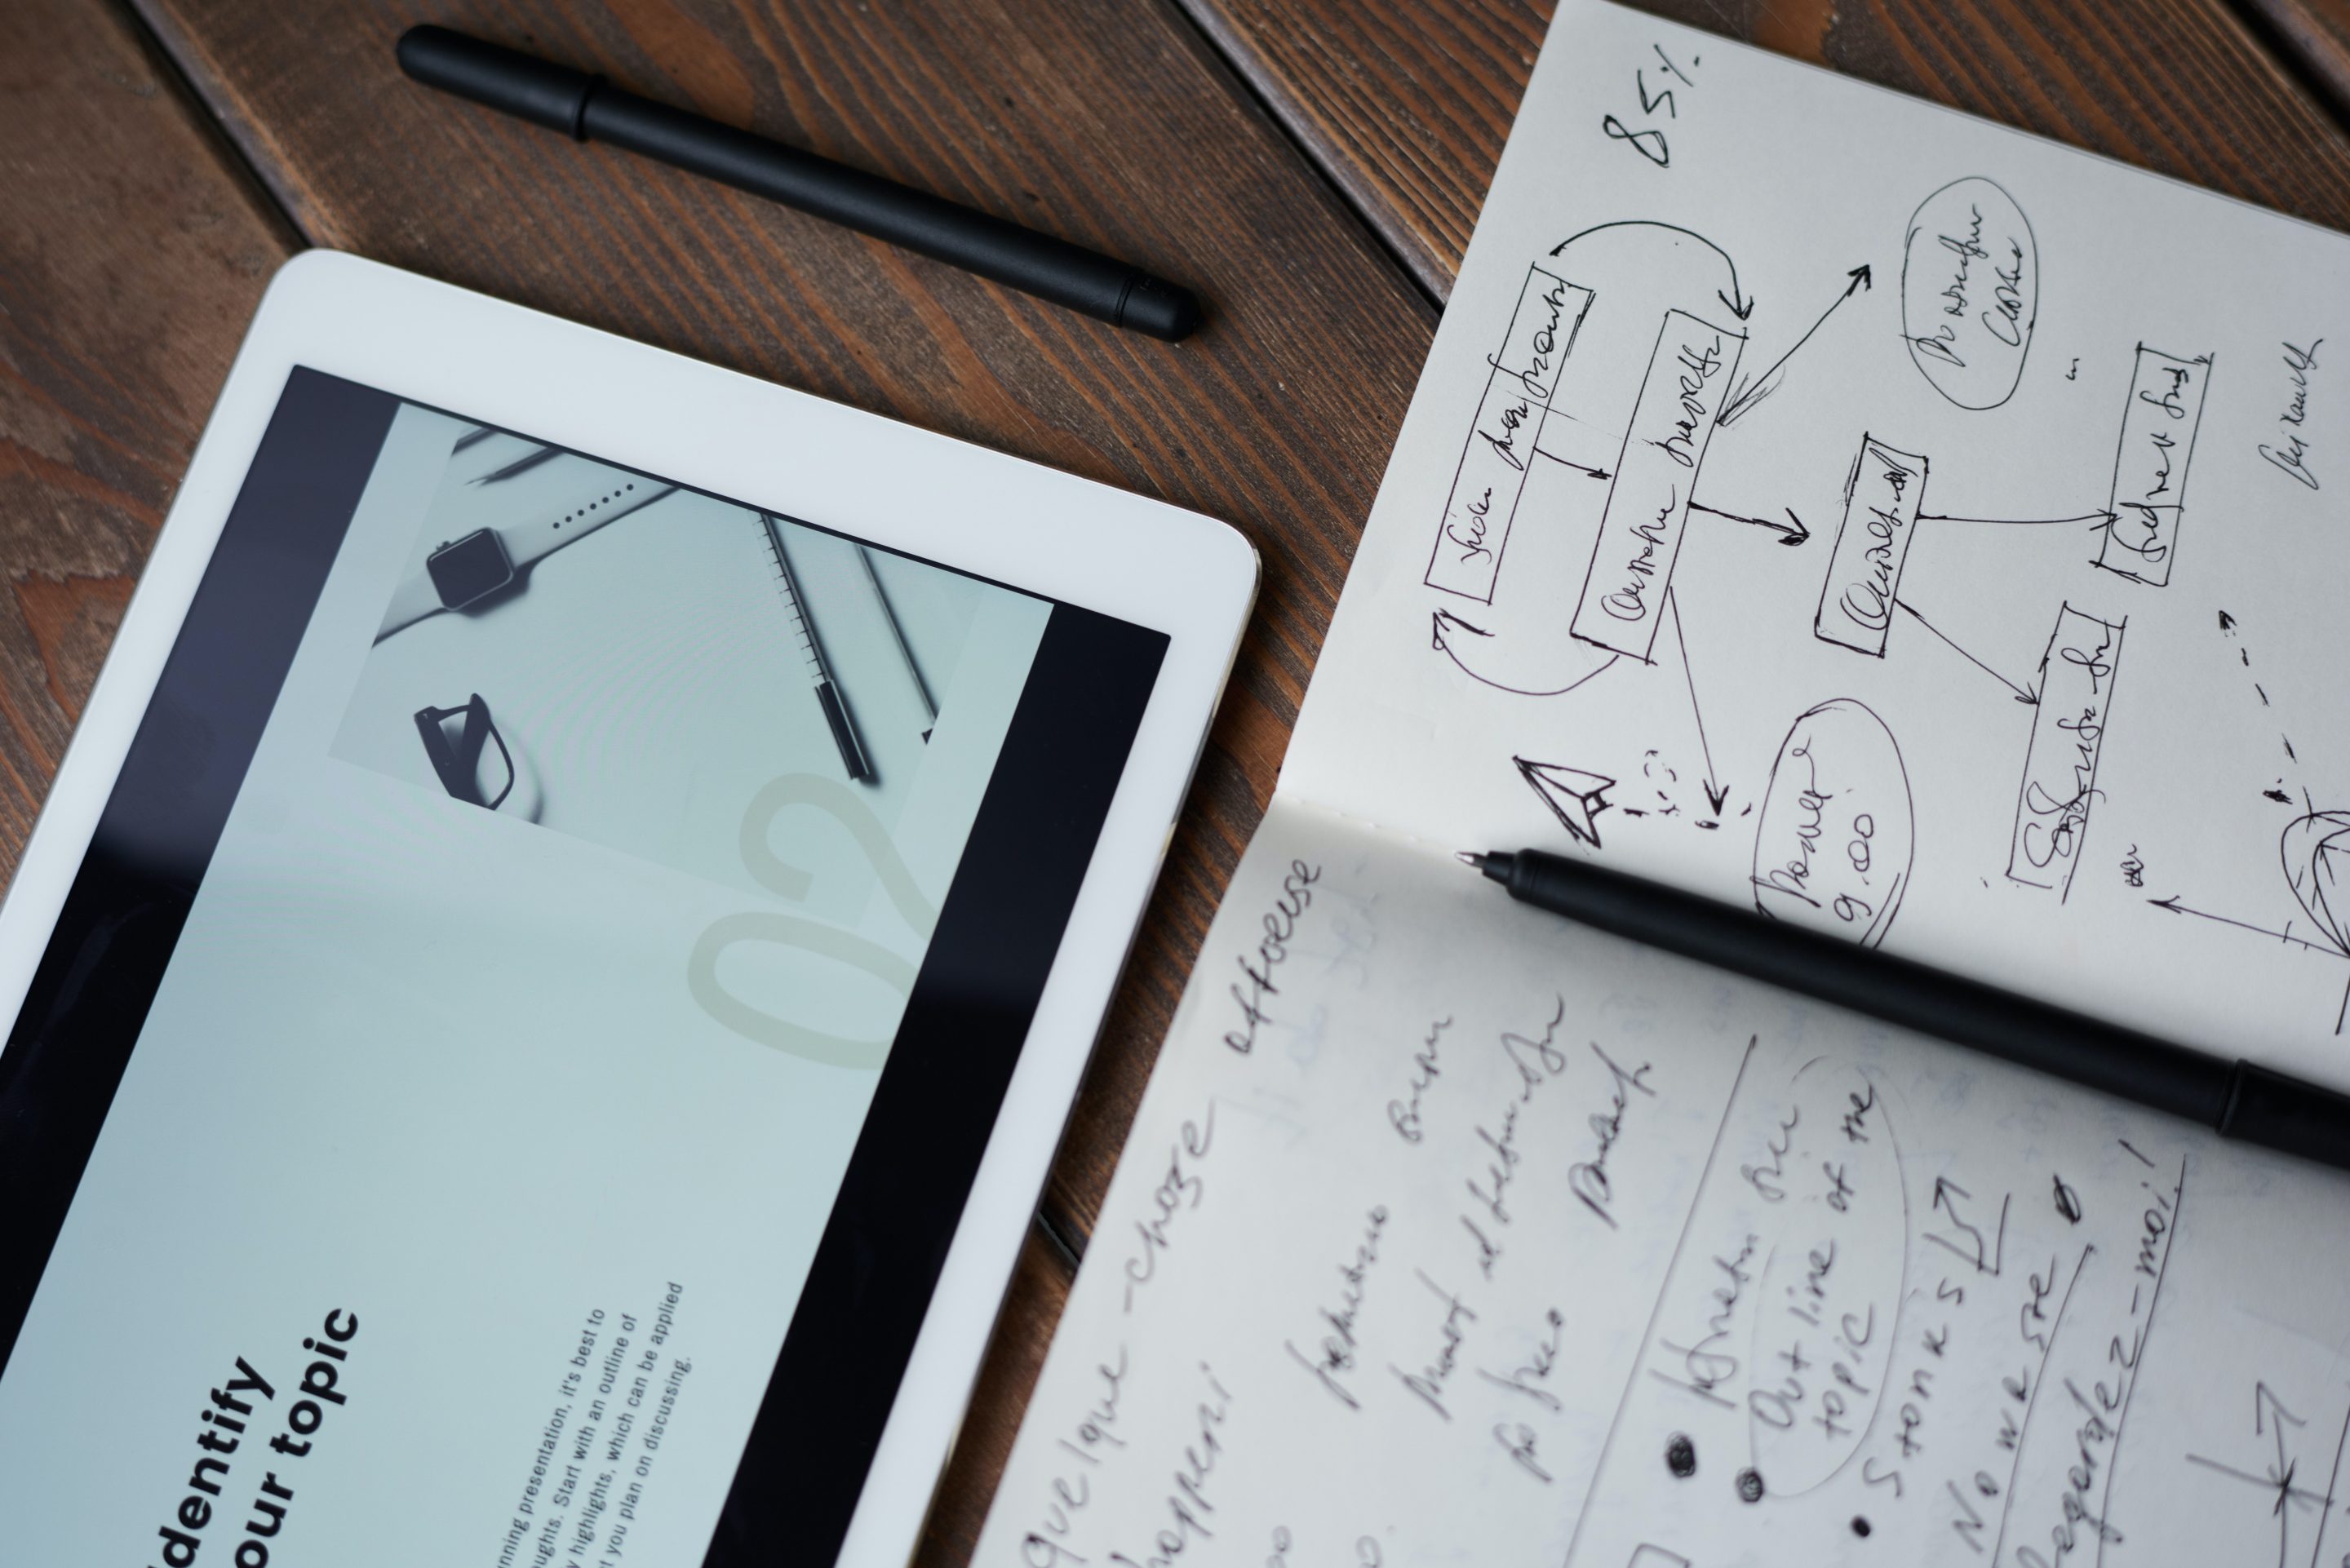 A tablet displaying engaging content, alongside a notebook and pen on a wooden table.